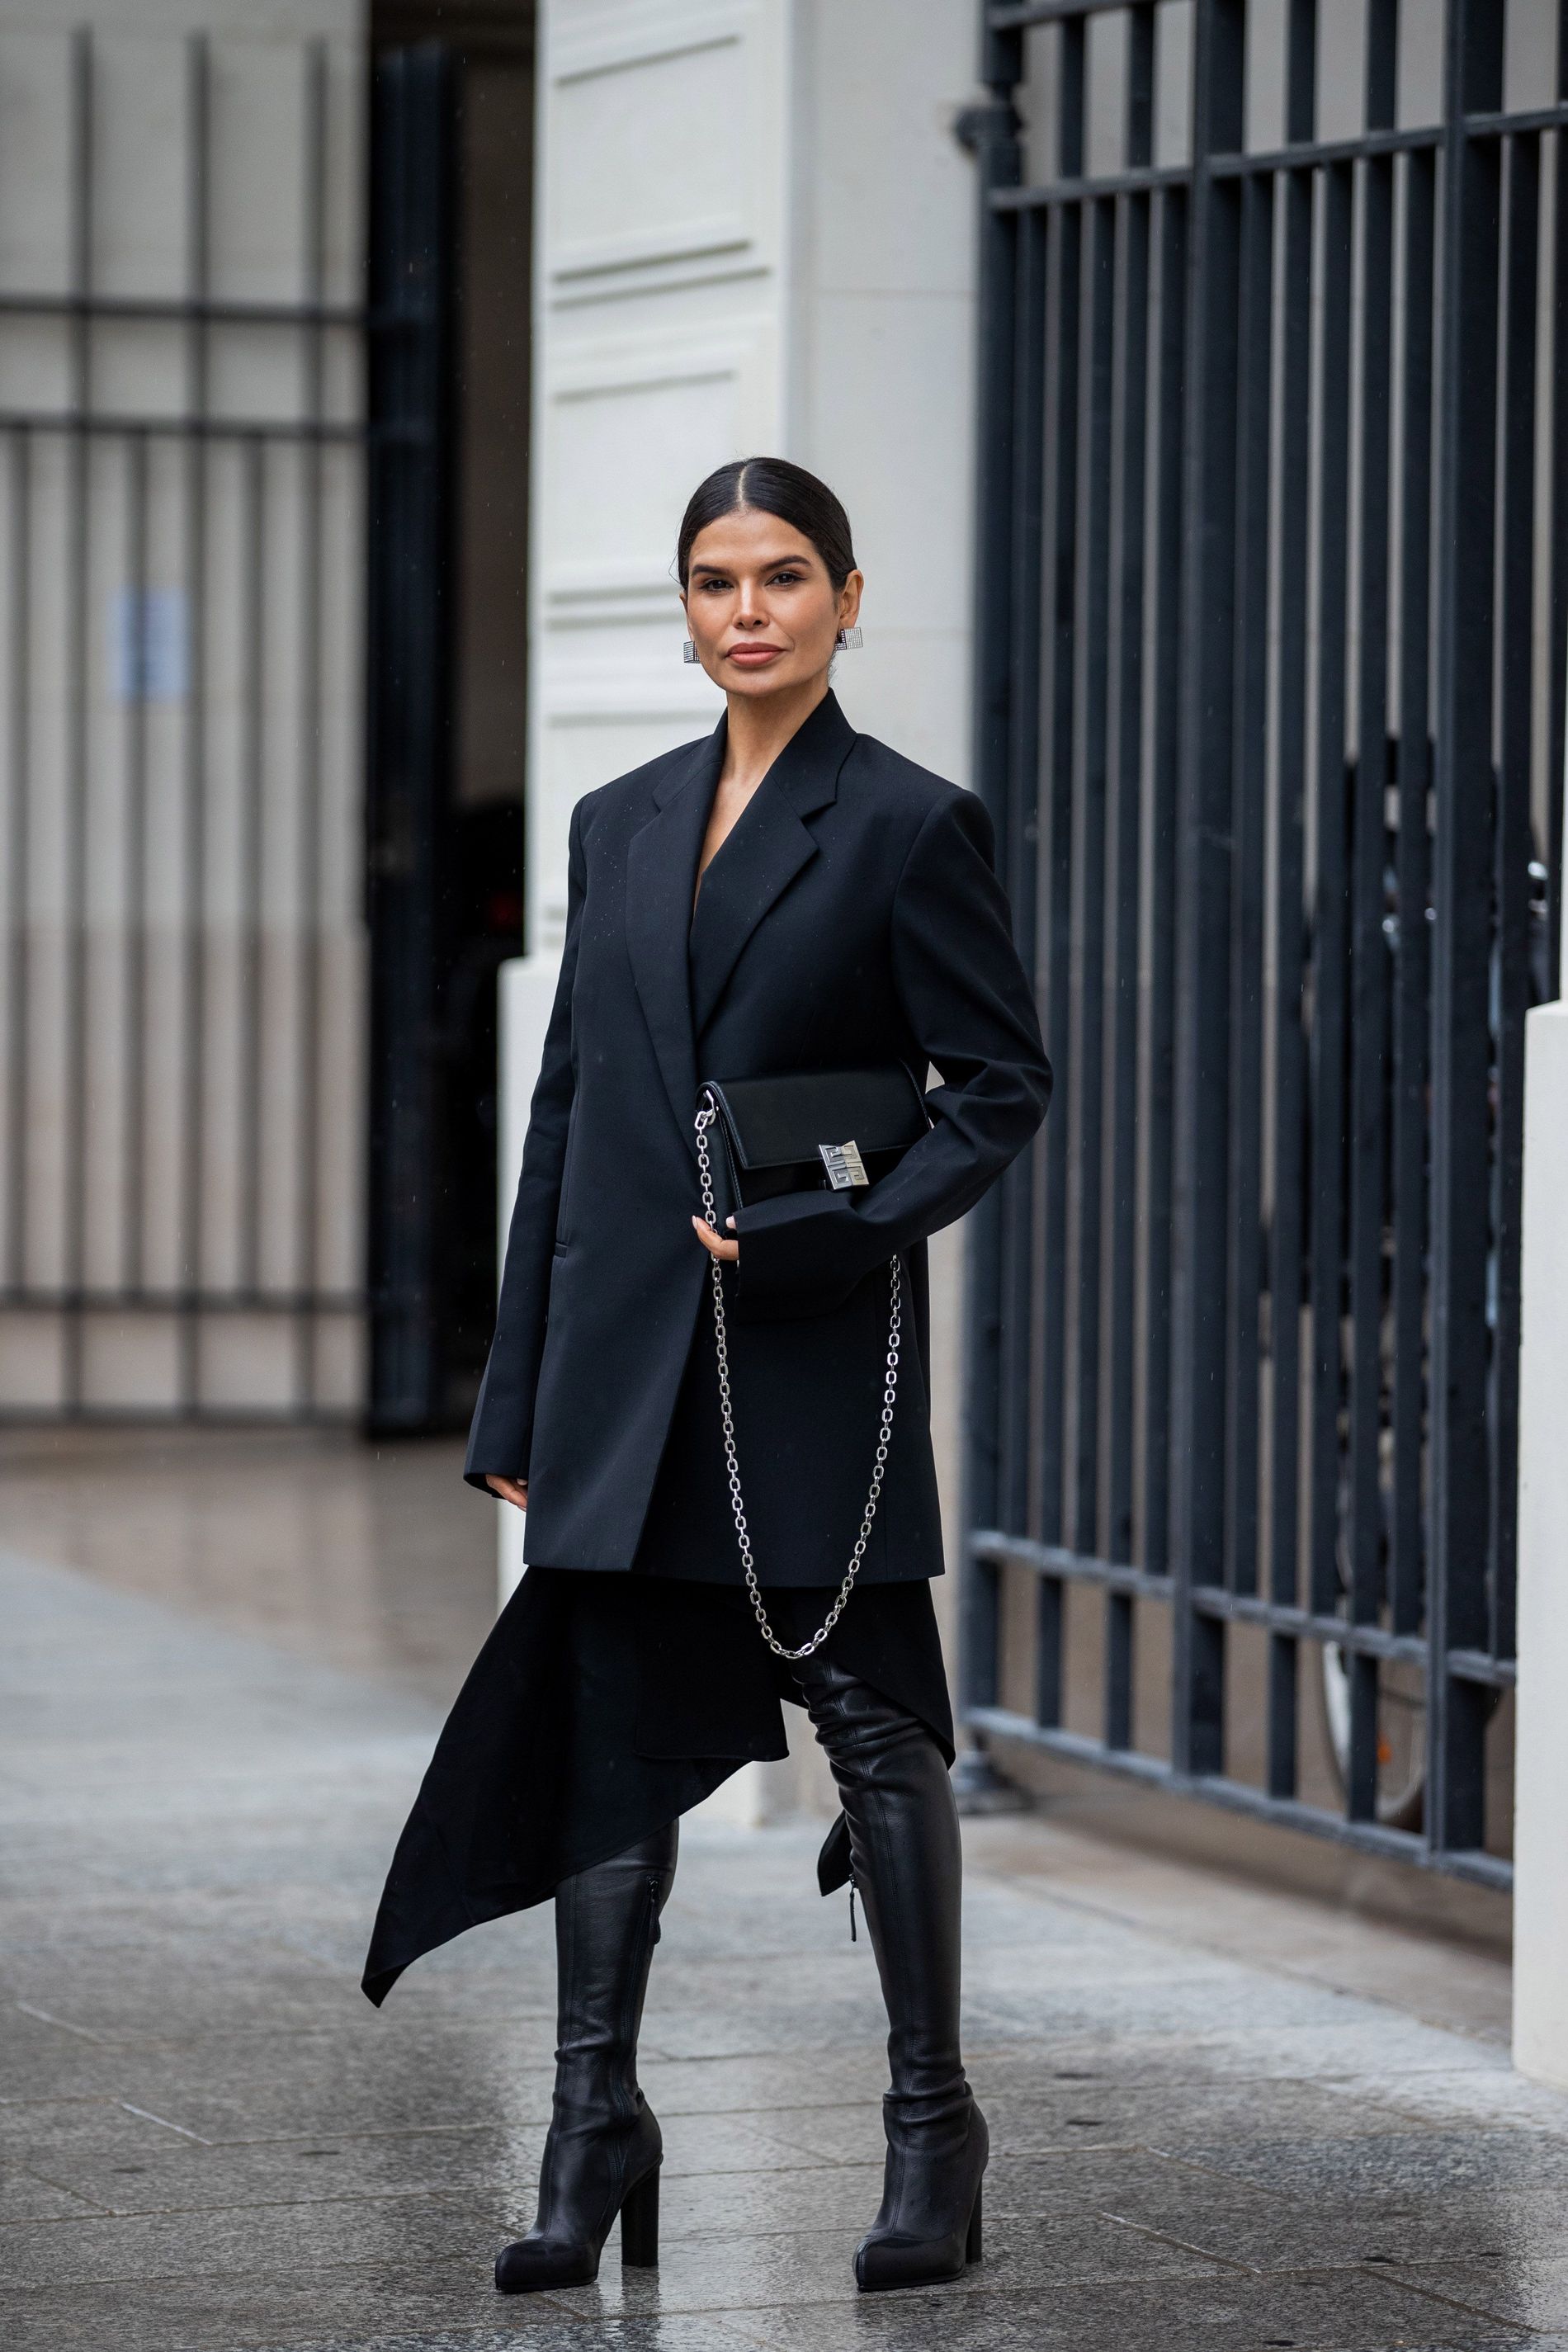 Wreedheid Persoonlijk Ananiver How to look classy in thigh-high boots and the 6 best ones to shop now -  Vogue Scandinavia